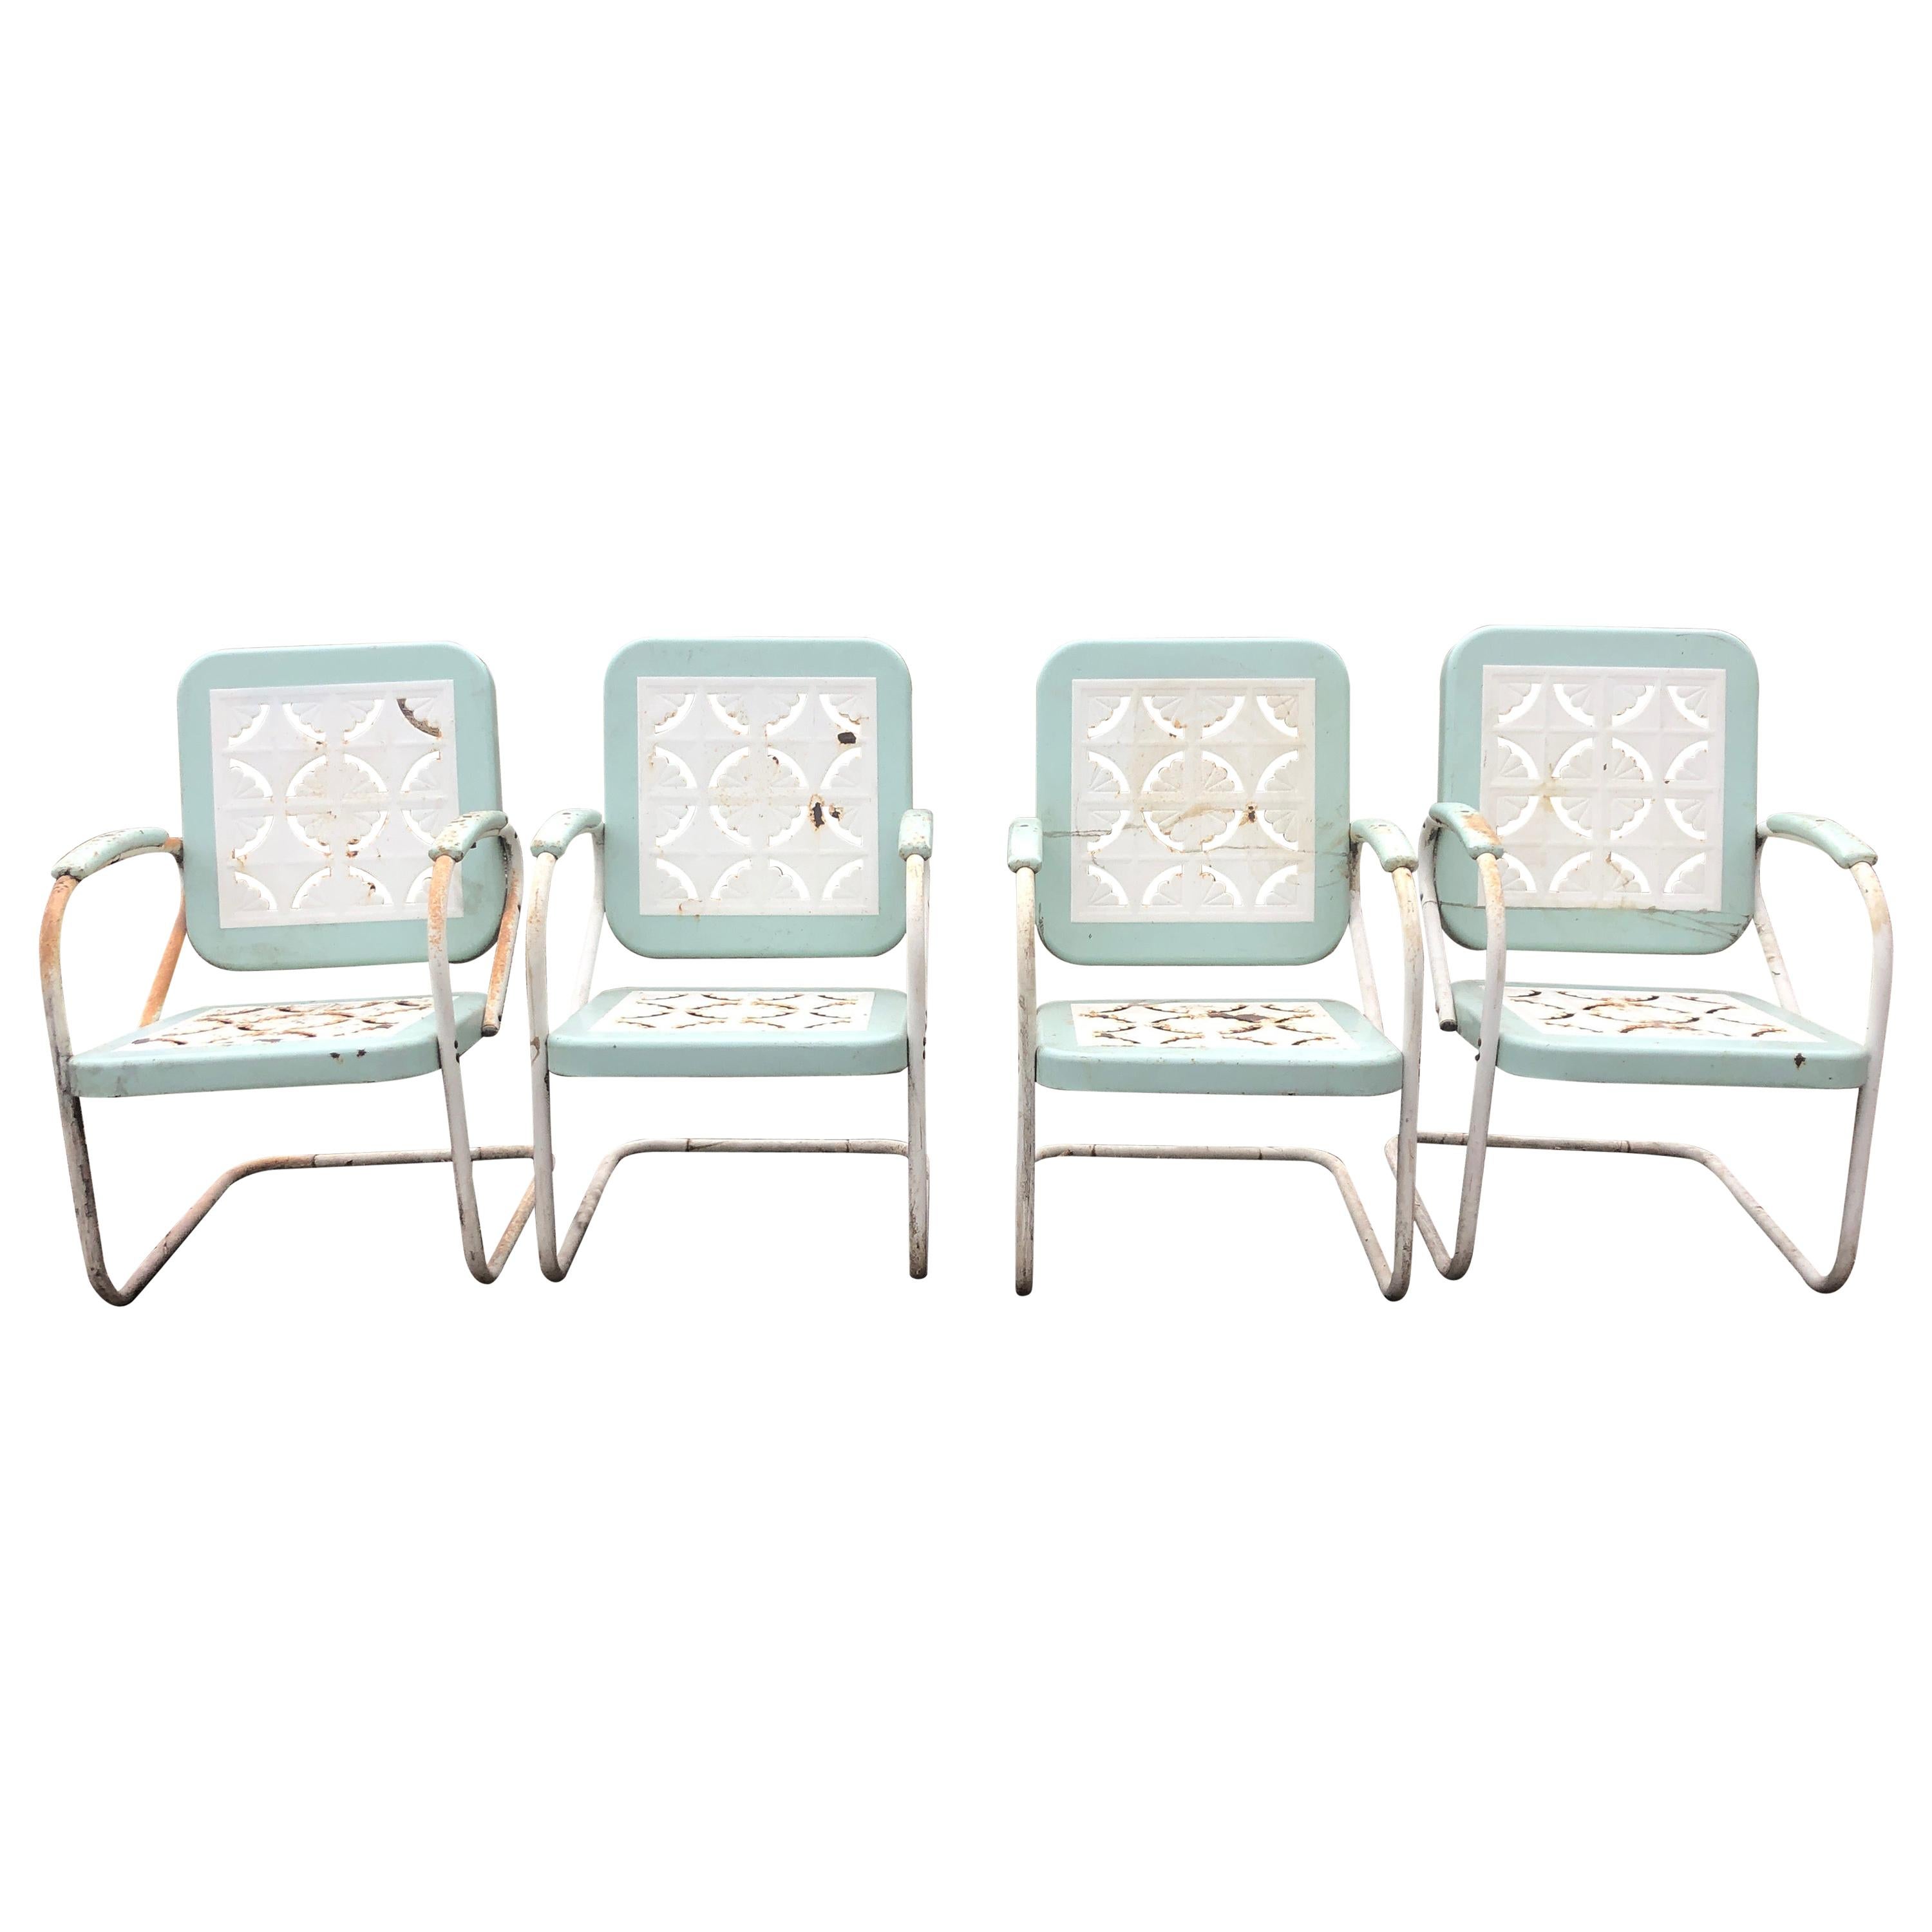 Charming Set of 4 Light Turquoise and White Country Patio Armchairs For Sale